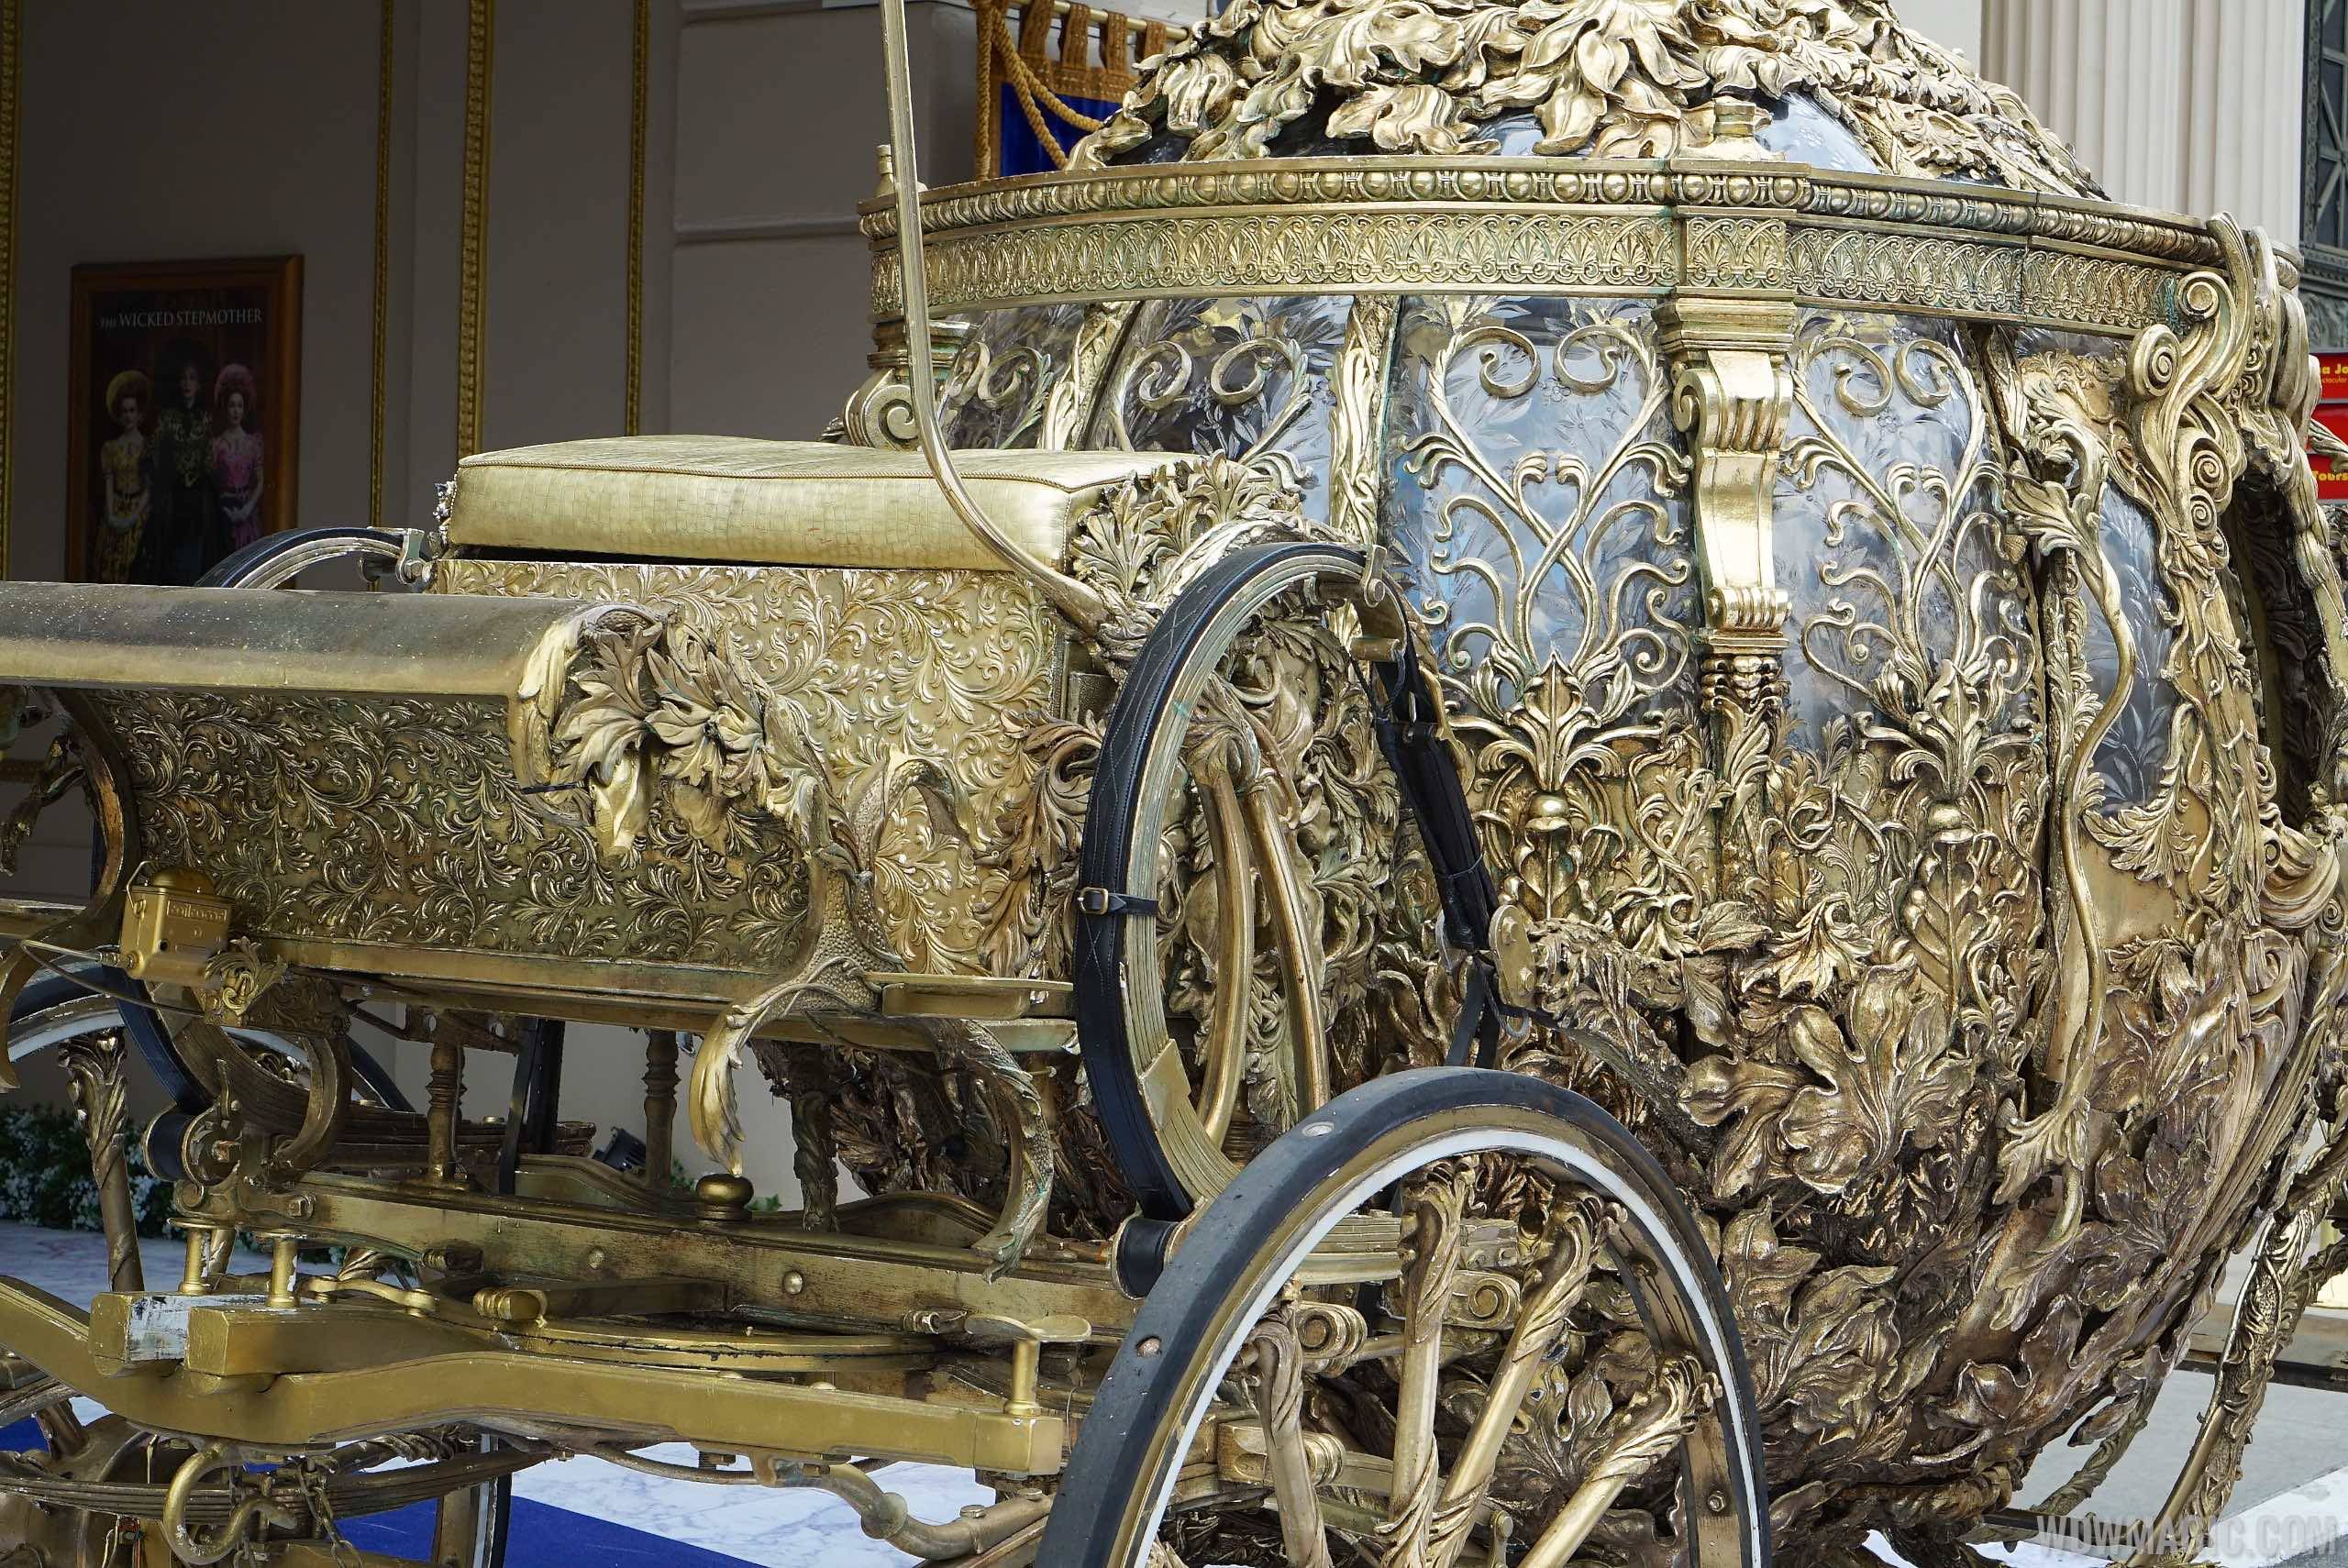 PHOTOS - Golden Coach prop from the upcoming 'Cinderella' movie now on display at Disney's Hollywood Studios